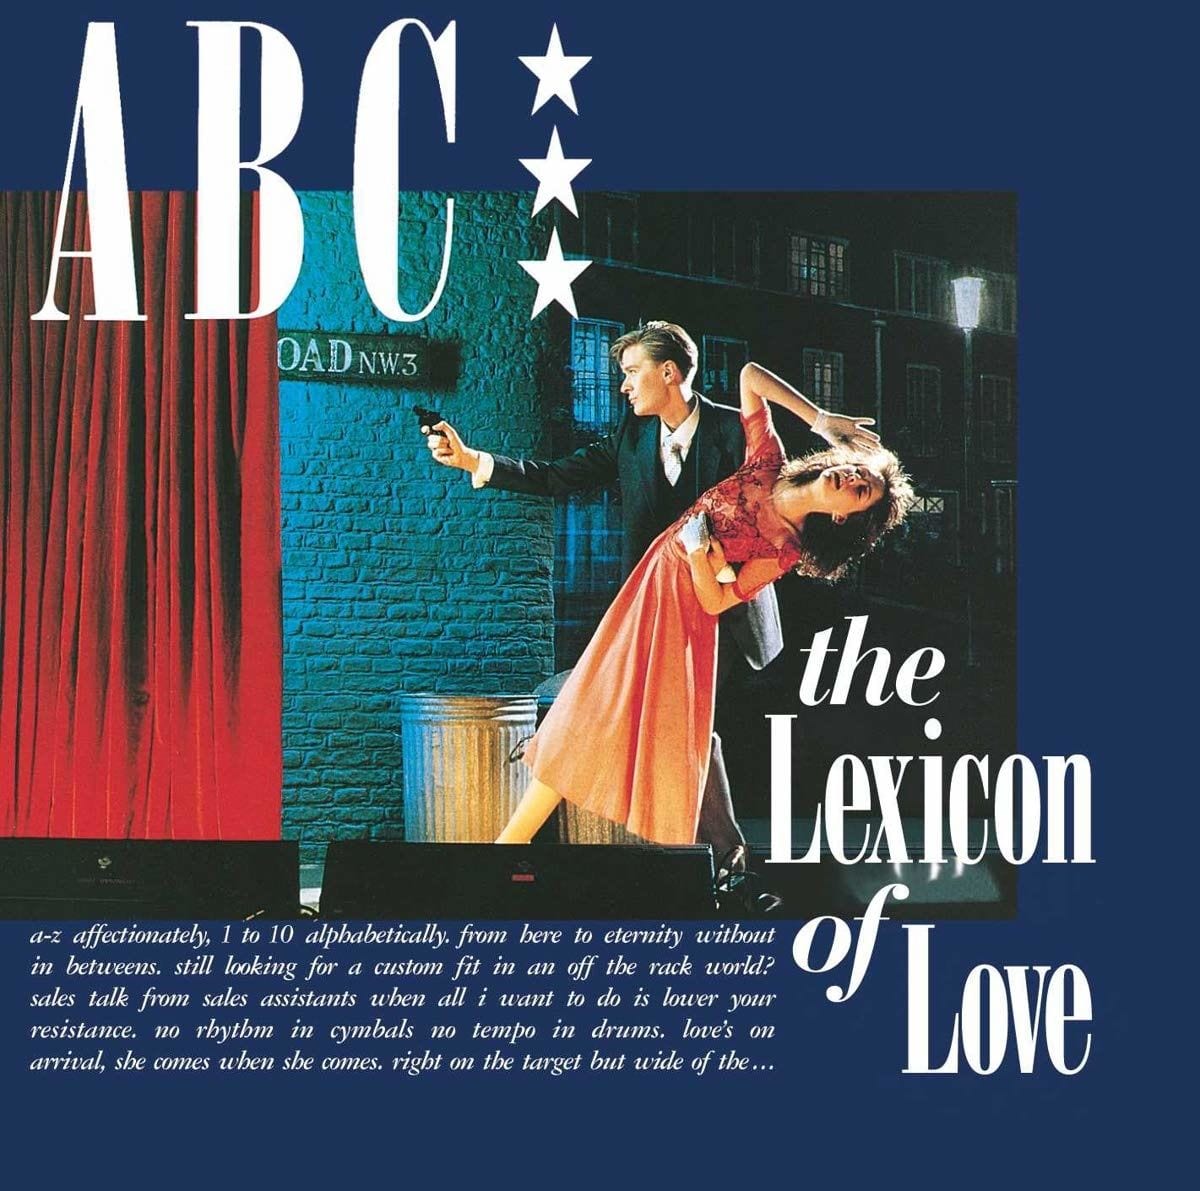 Looking for the Girl That Meets Supply with Demand: ABC’s ‘The Lexicon of Love’